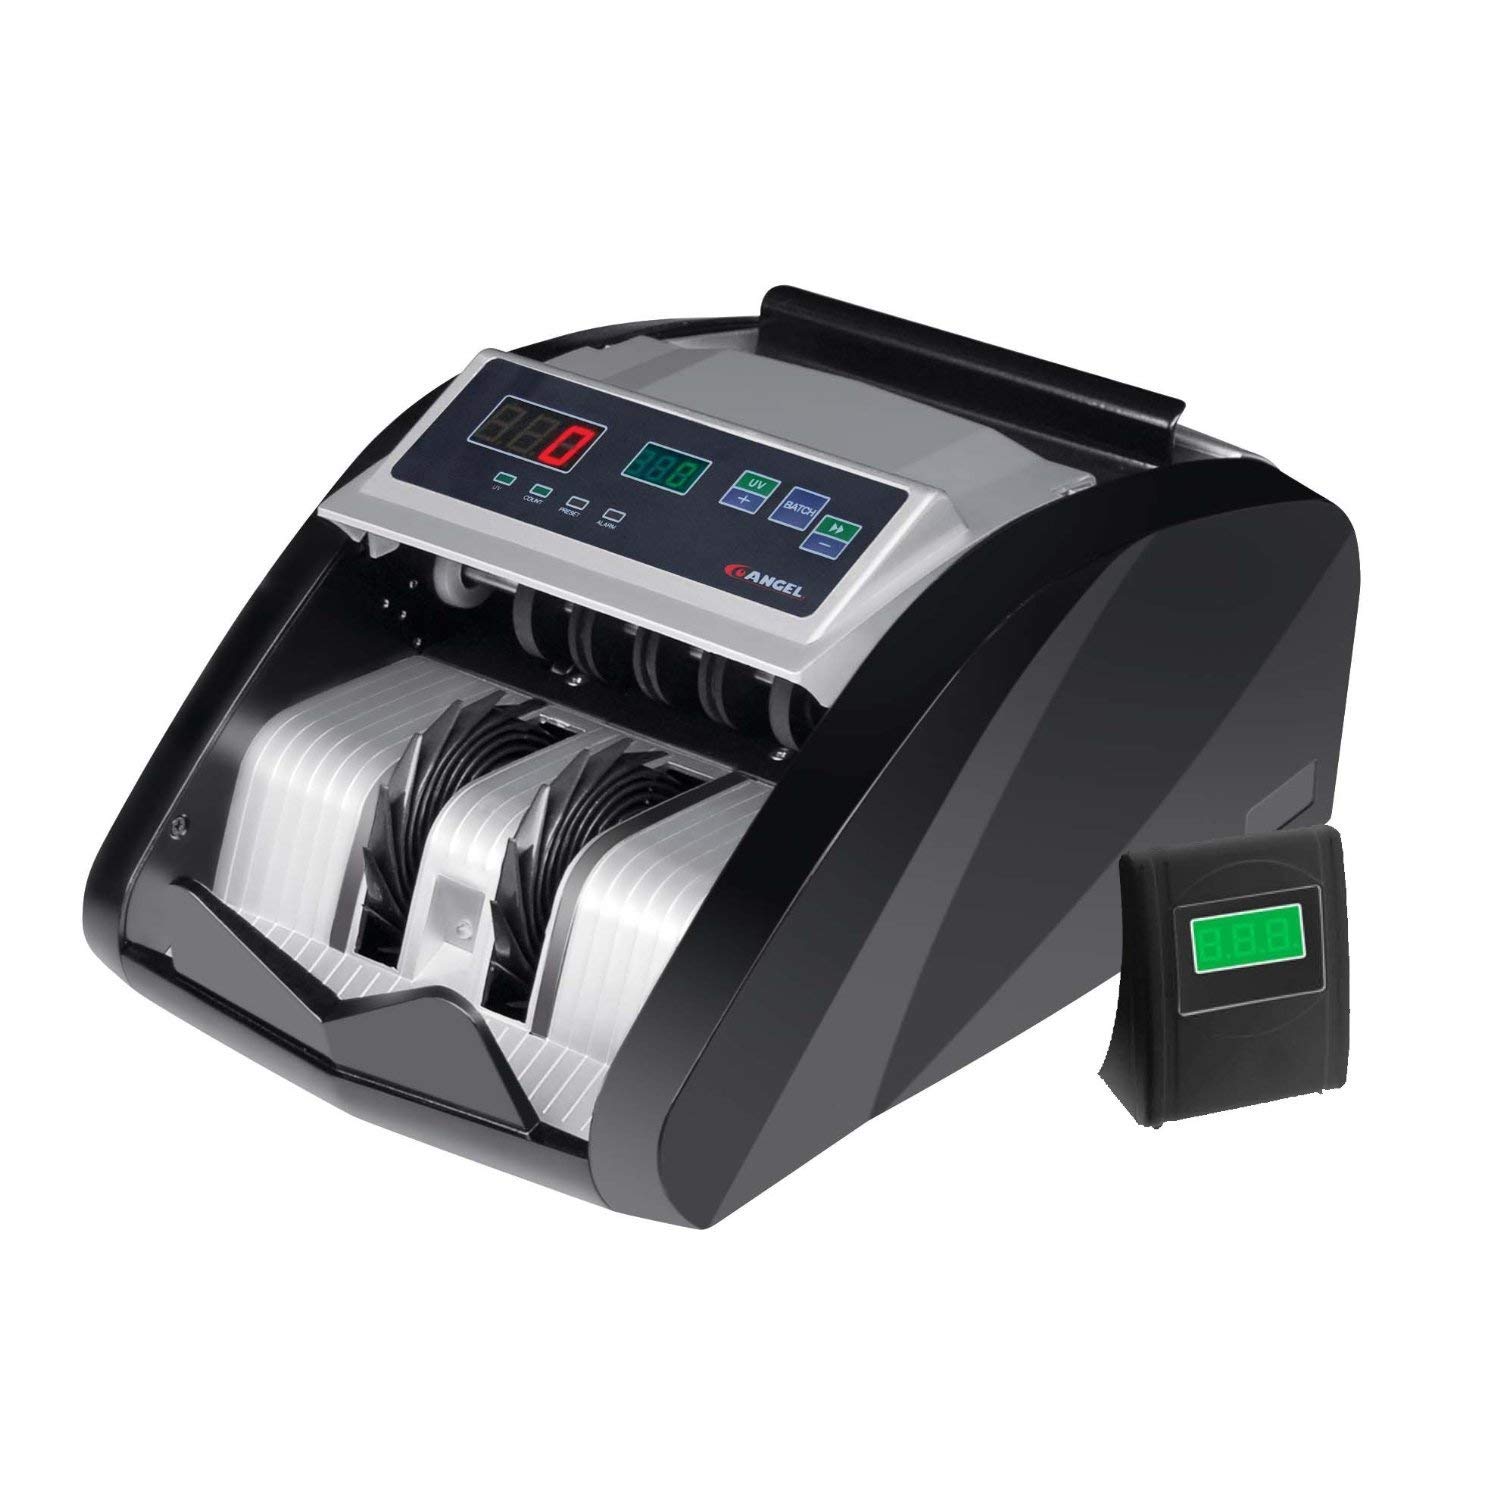 ANGEL POS Bill Counter with External Counter Display, UV Counterfeit Detection Office Tools